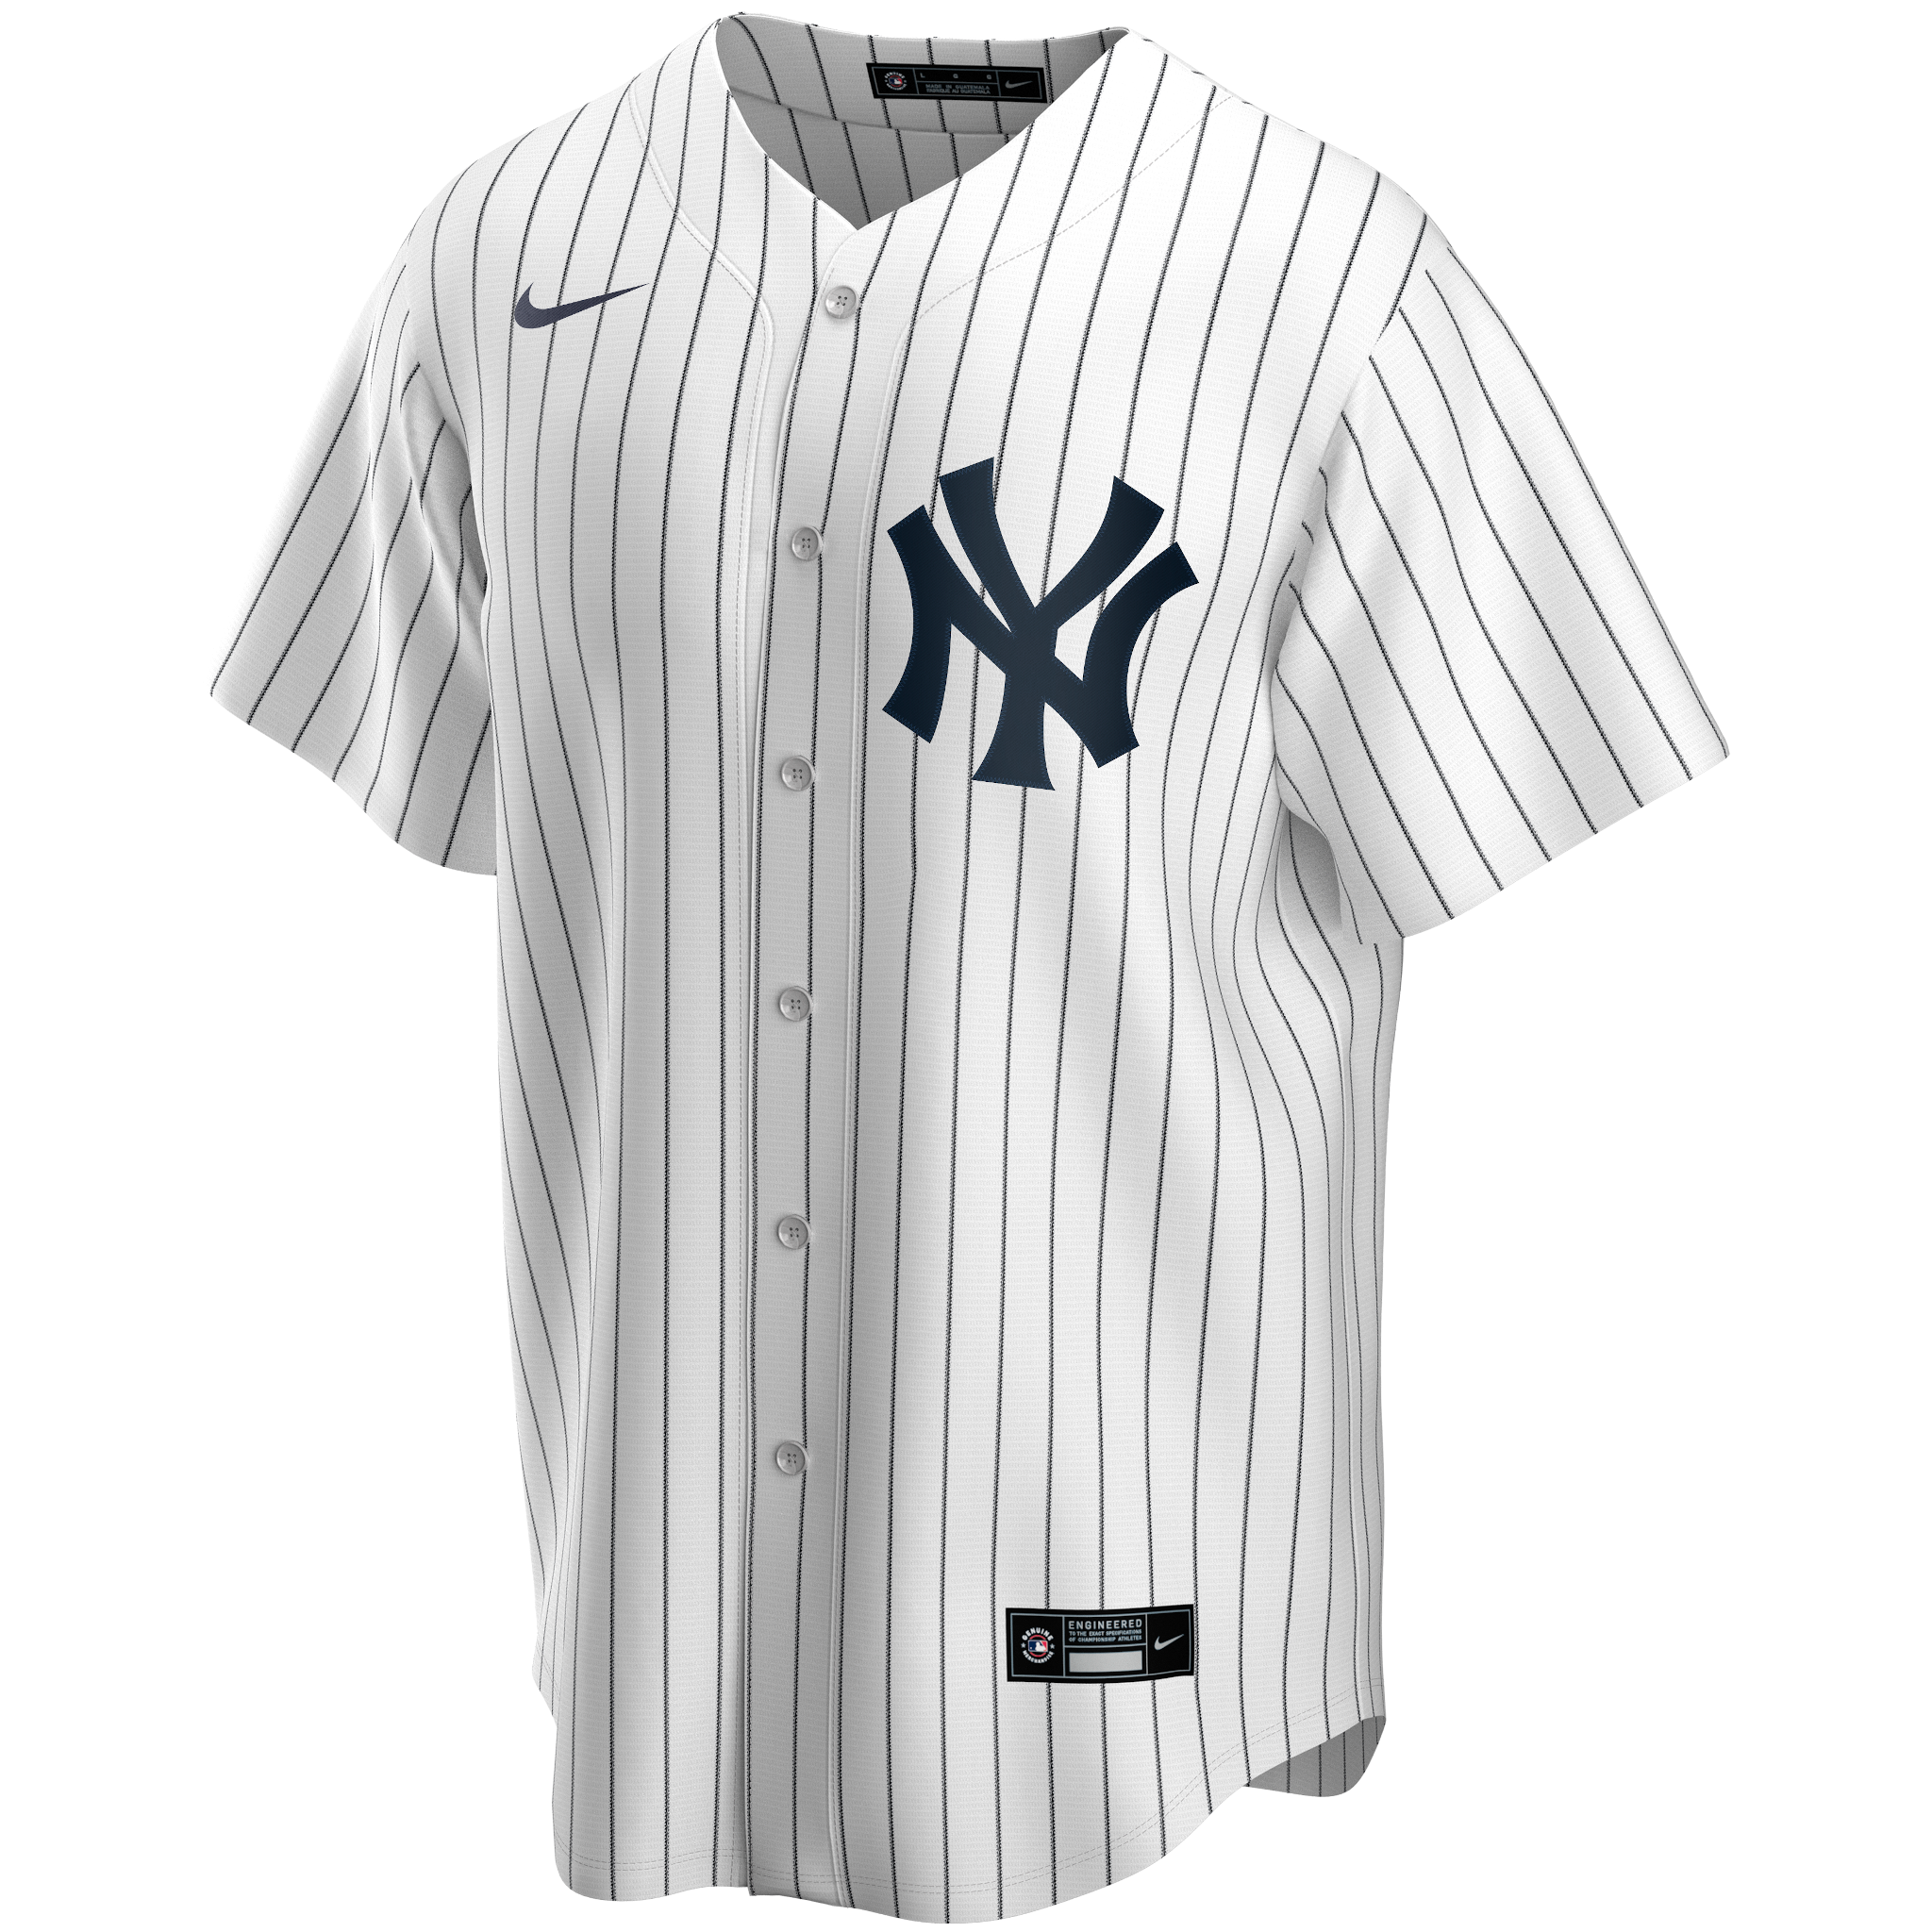 2009 Yankees signed pro jersey alex rodriguez ins Swisher